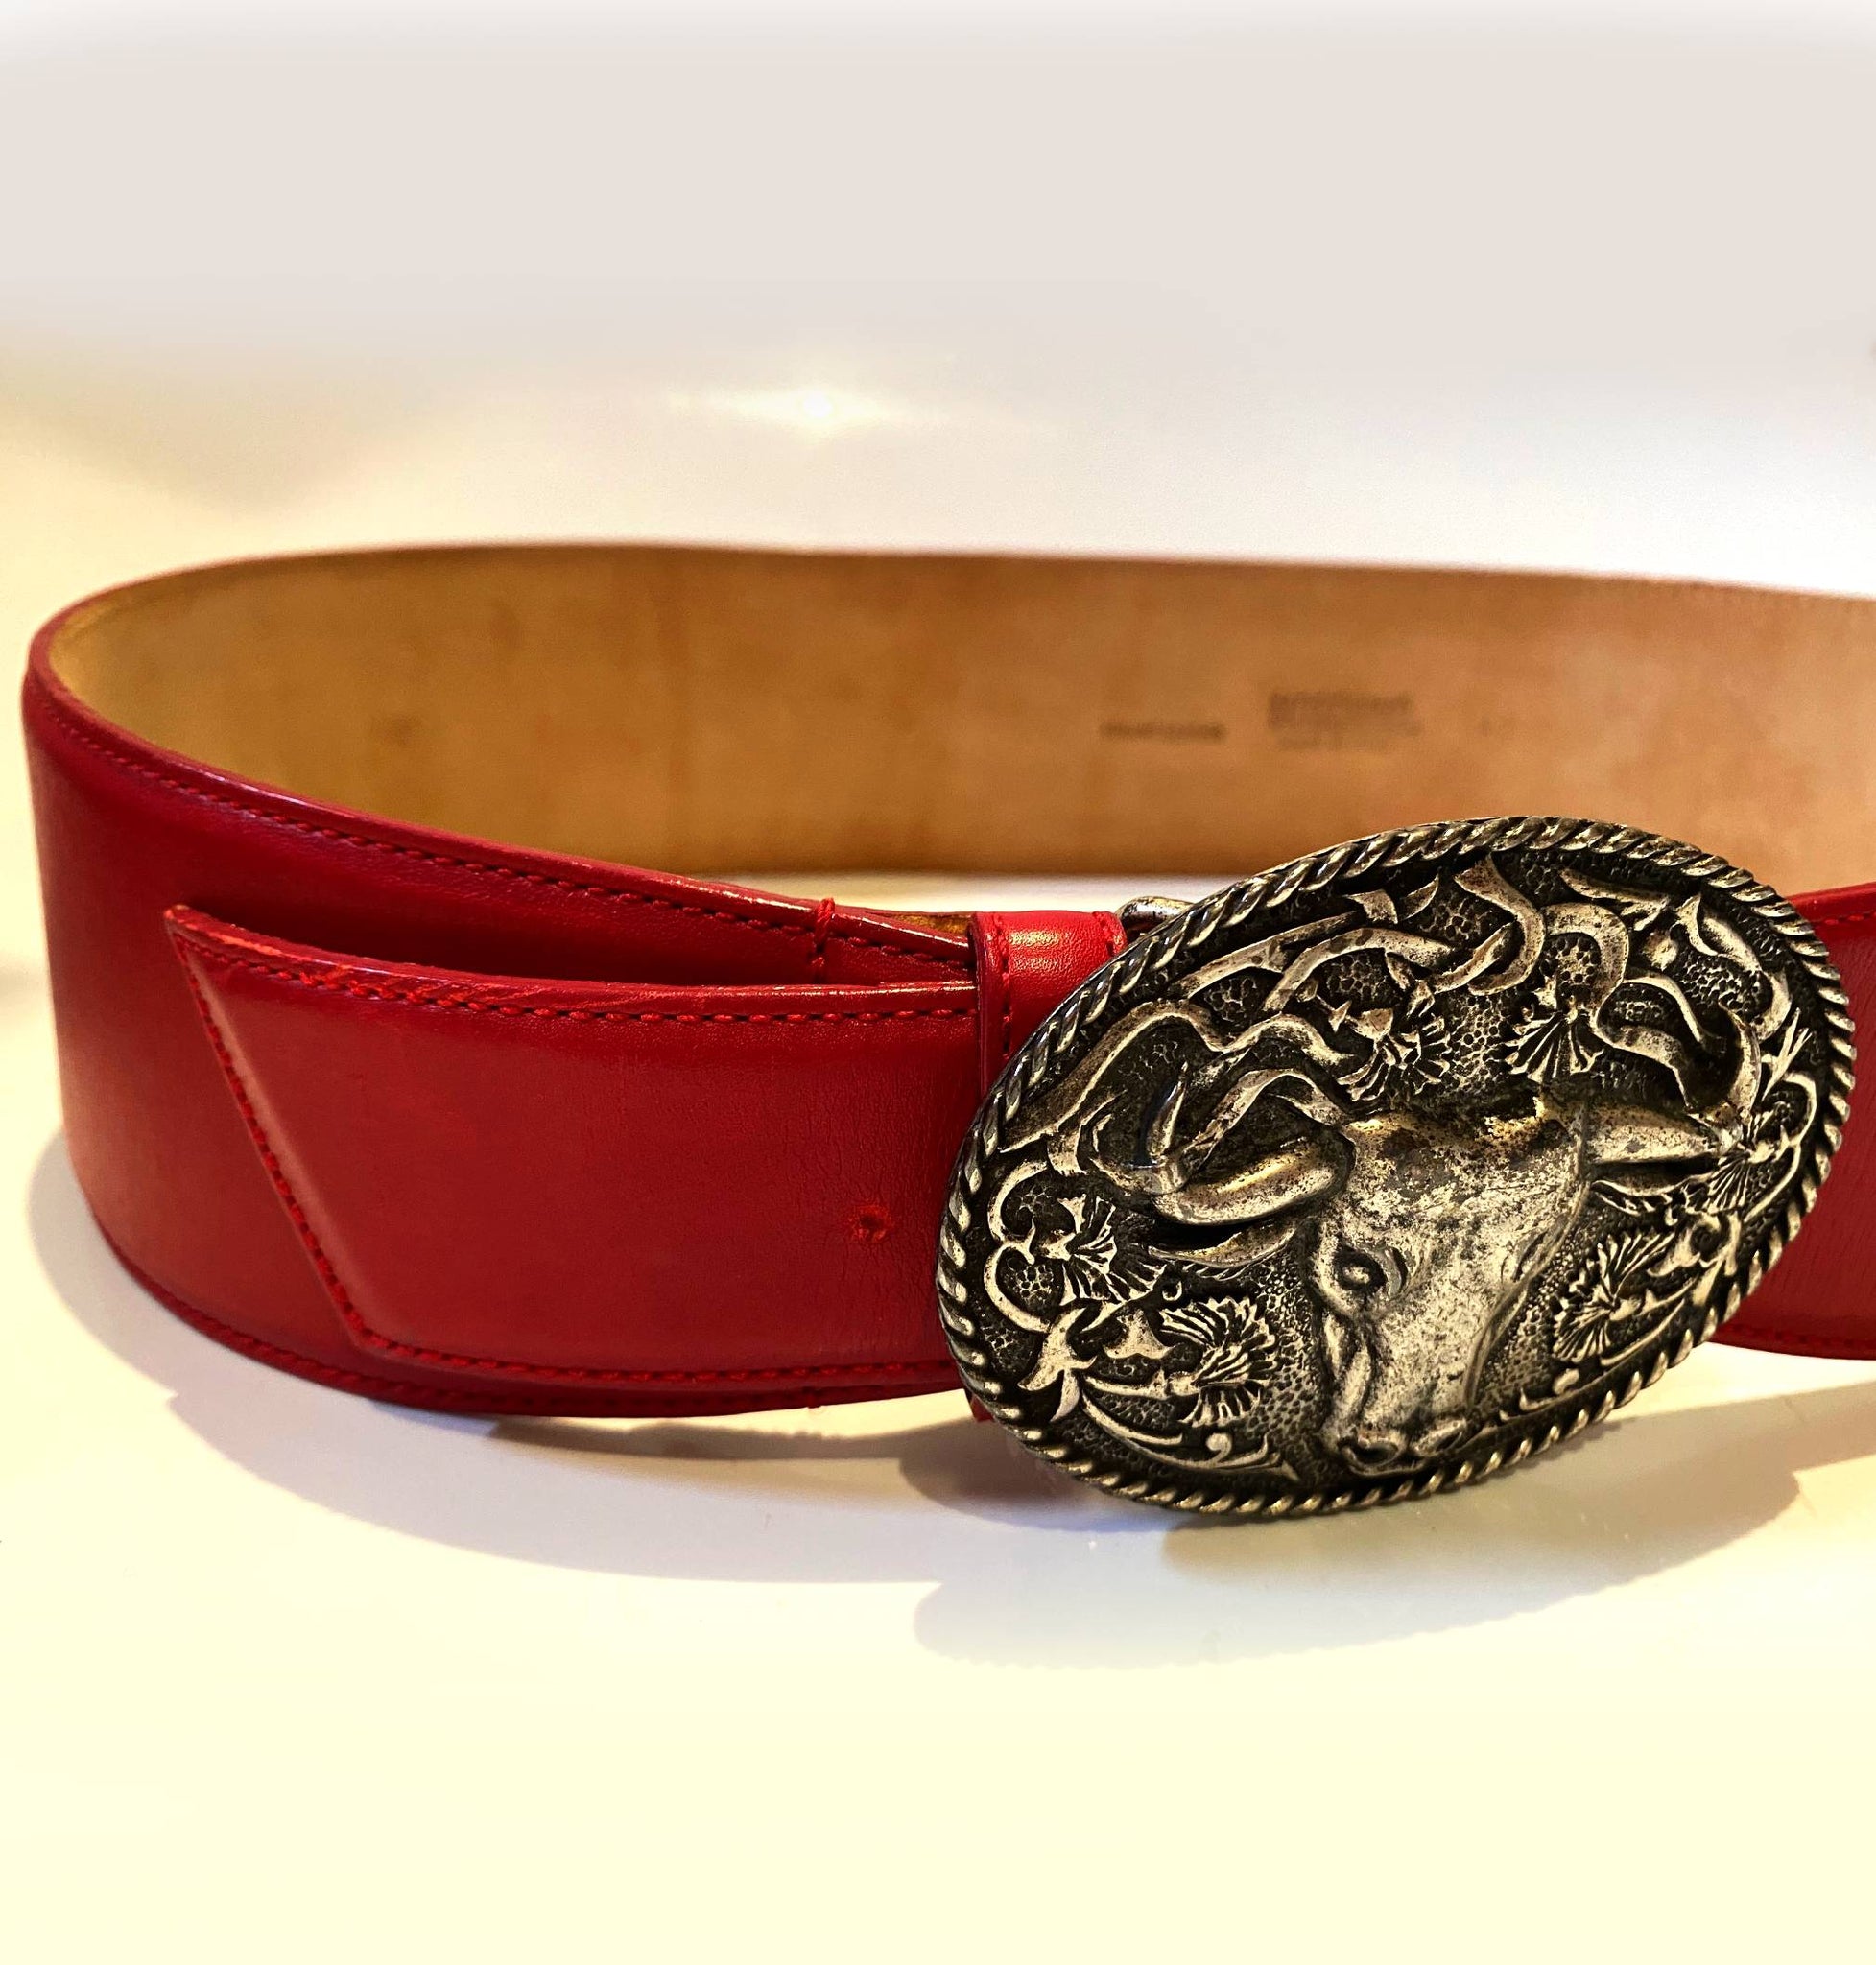 1980s MOSCHINO BULL HEAD BUCKLE RED LEATHER HIGH WAIST BELT - style - CHNGR